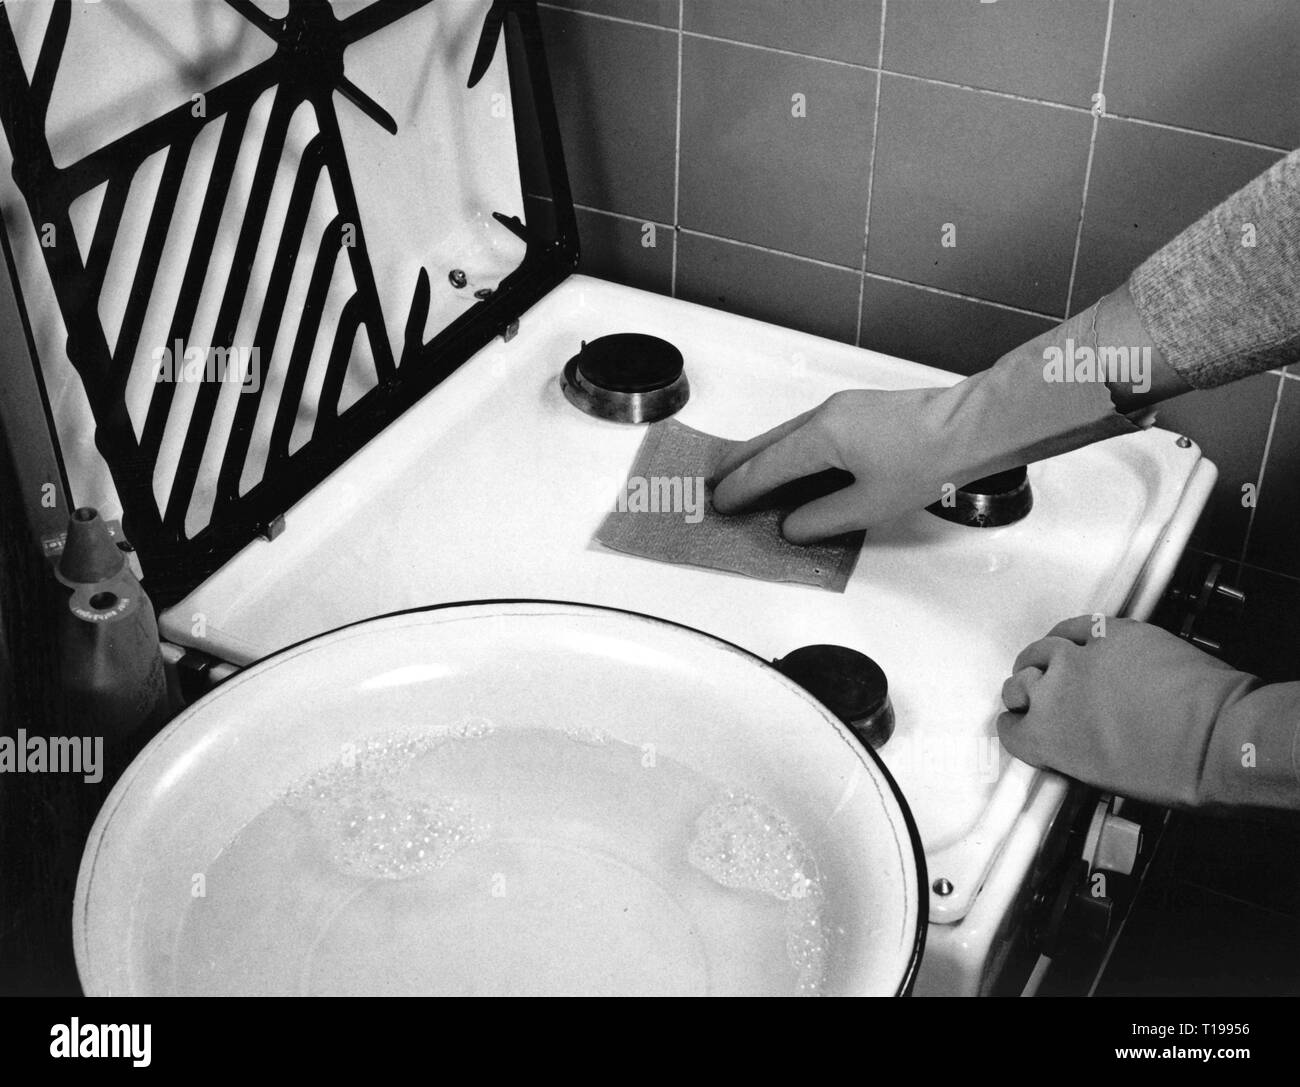 household, kitchen and kitchenware, cleaning a gas stove, 1960s, range, stoves, hob, stove, stove top, stovetop, cook, cooking, cleanliness, cleanse, cleansing, cloth, cloths, rubber glove, rubber gloves, glove, gloves, household chores, do the chores, housekeep, domestic work, housework, cooker, cookers, water bowl, bowl, bowls, water, enamel, household, households, kitchen, kitchens, cleaning, clean, gas stove, gas stoves, historic, historical, people, 20th century, Additional-Rights-Clearance-Info-Not-Available Stock Photo